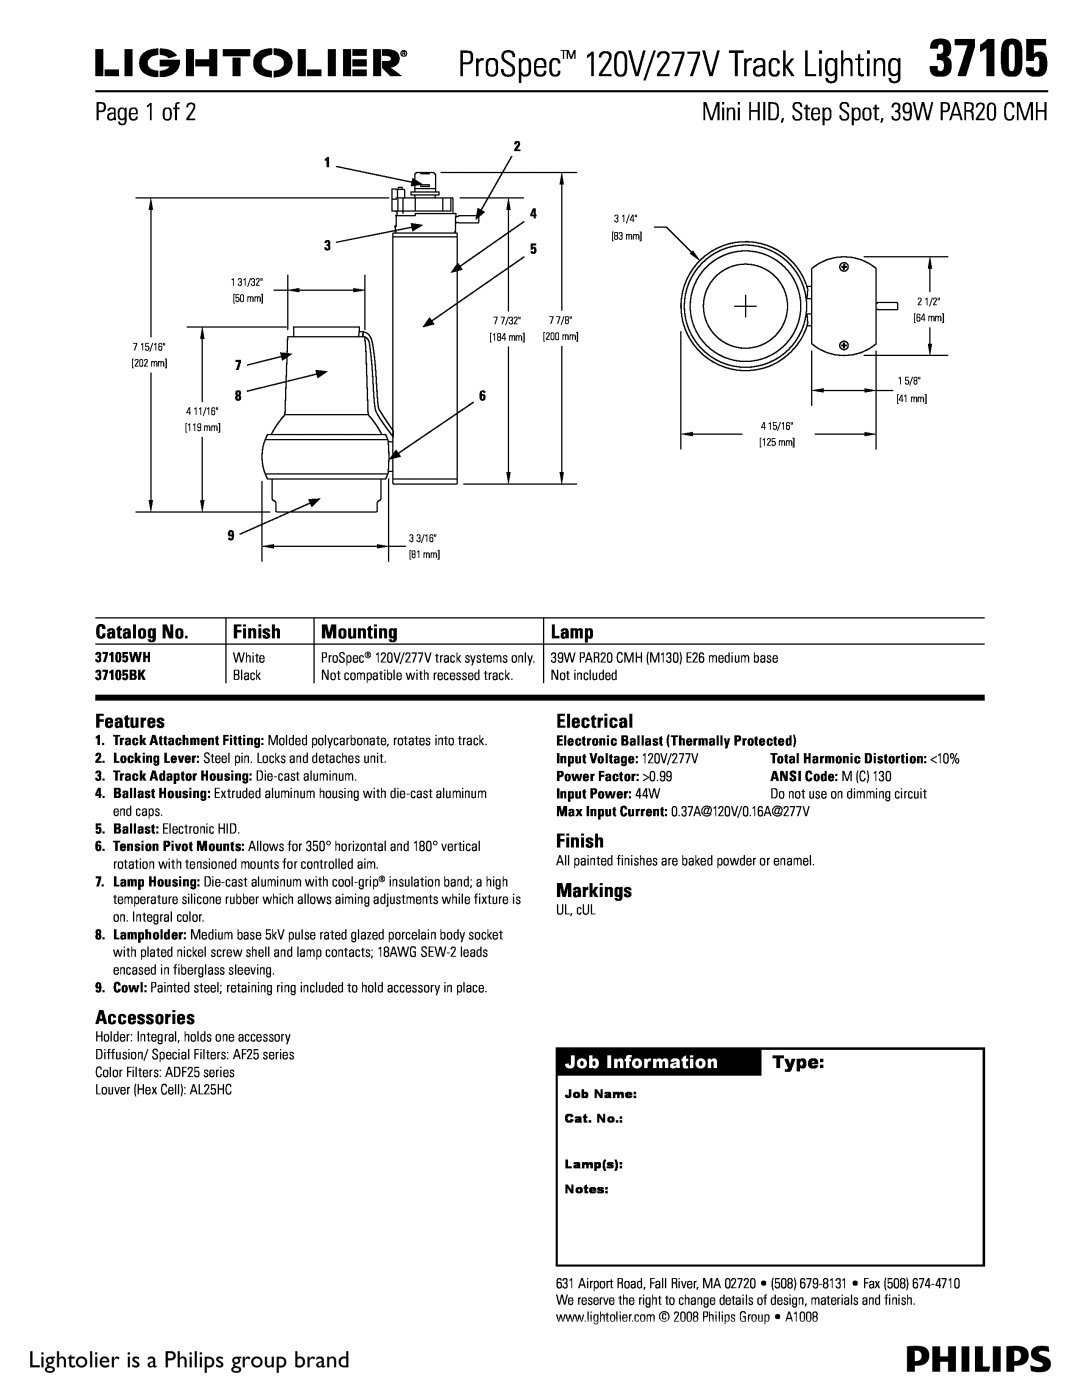 Lightolier 37105 manual Page 1 of, Lightolier is a Philips group brand, Catalog No, Finish, Mounting, Lamp, Features, Type 